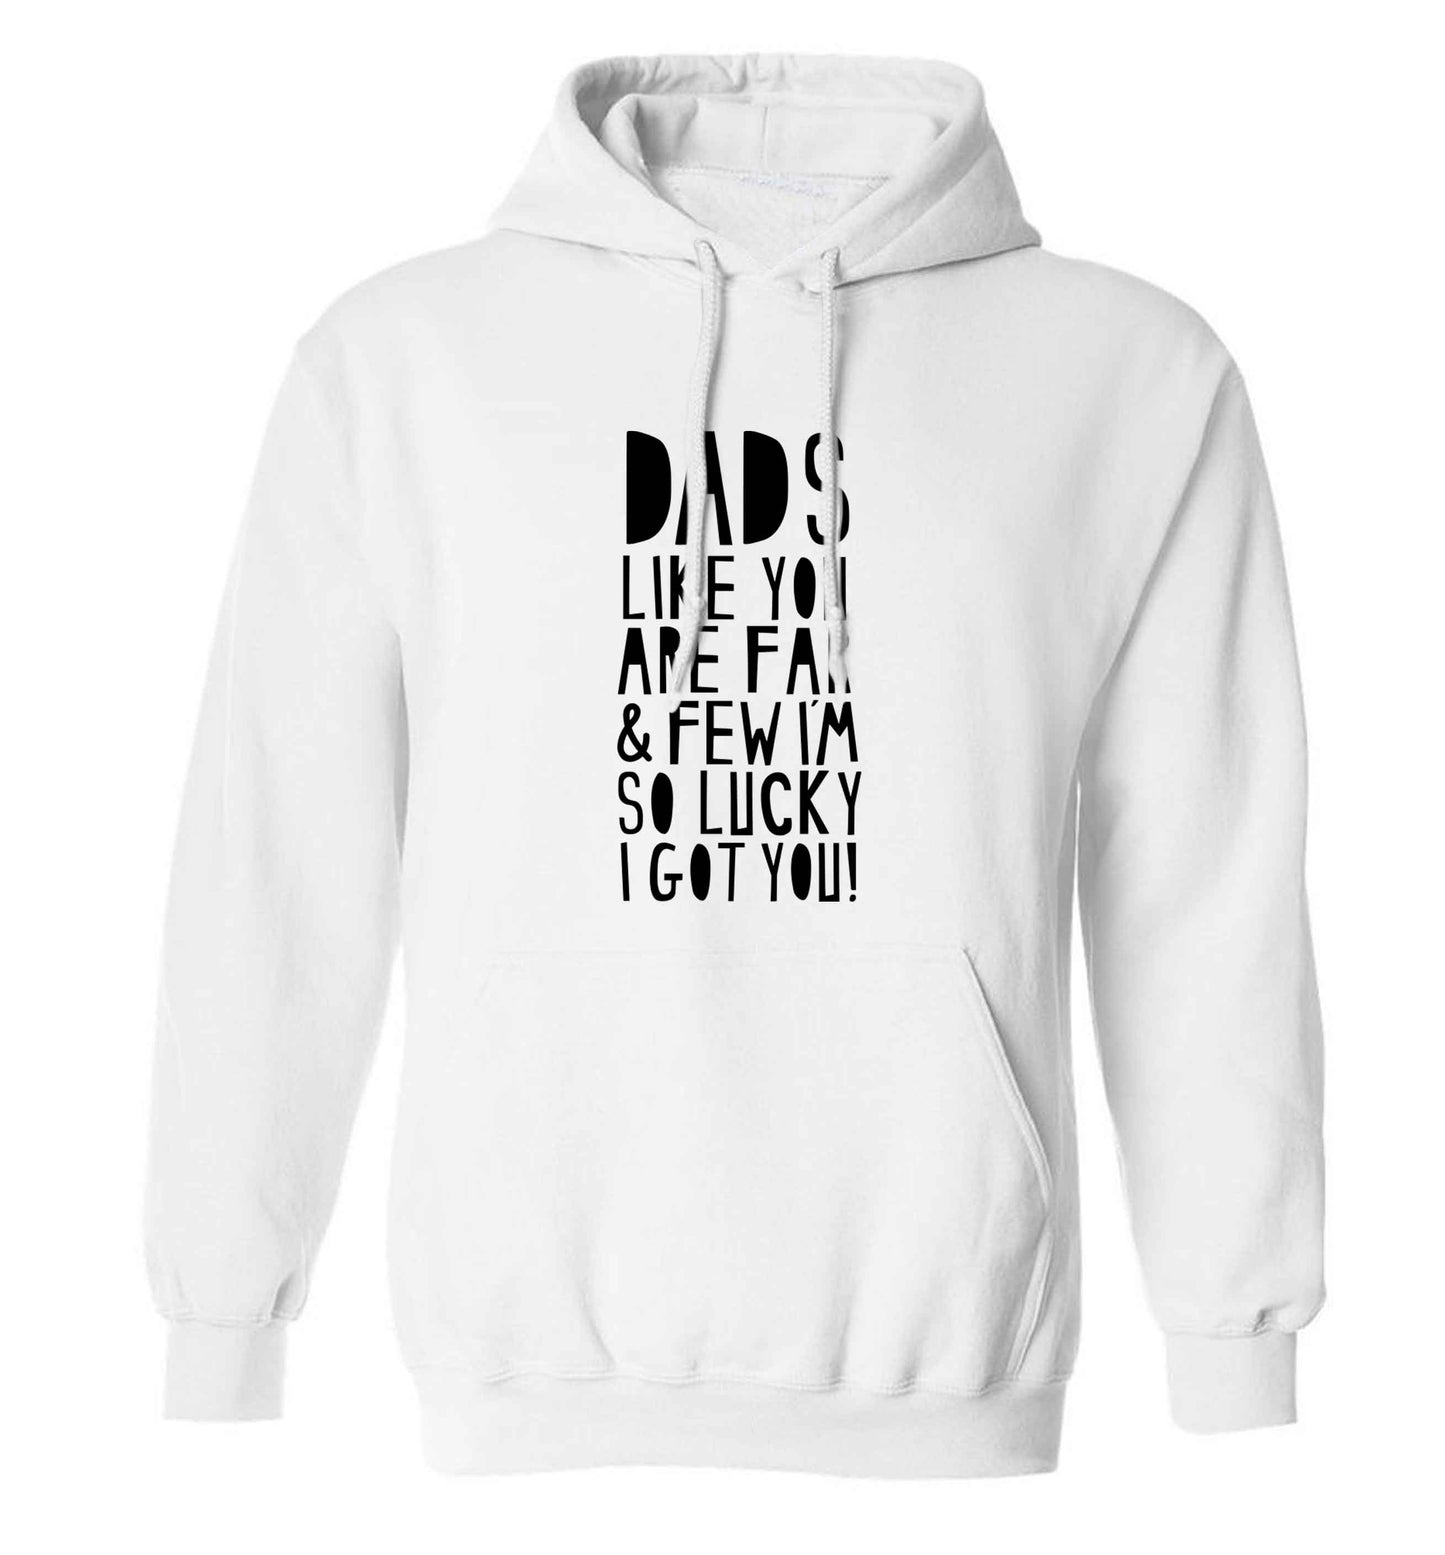 Dads like you are far and few I'm so luck I got you! adults unisex white hoodie 2XL